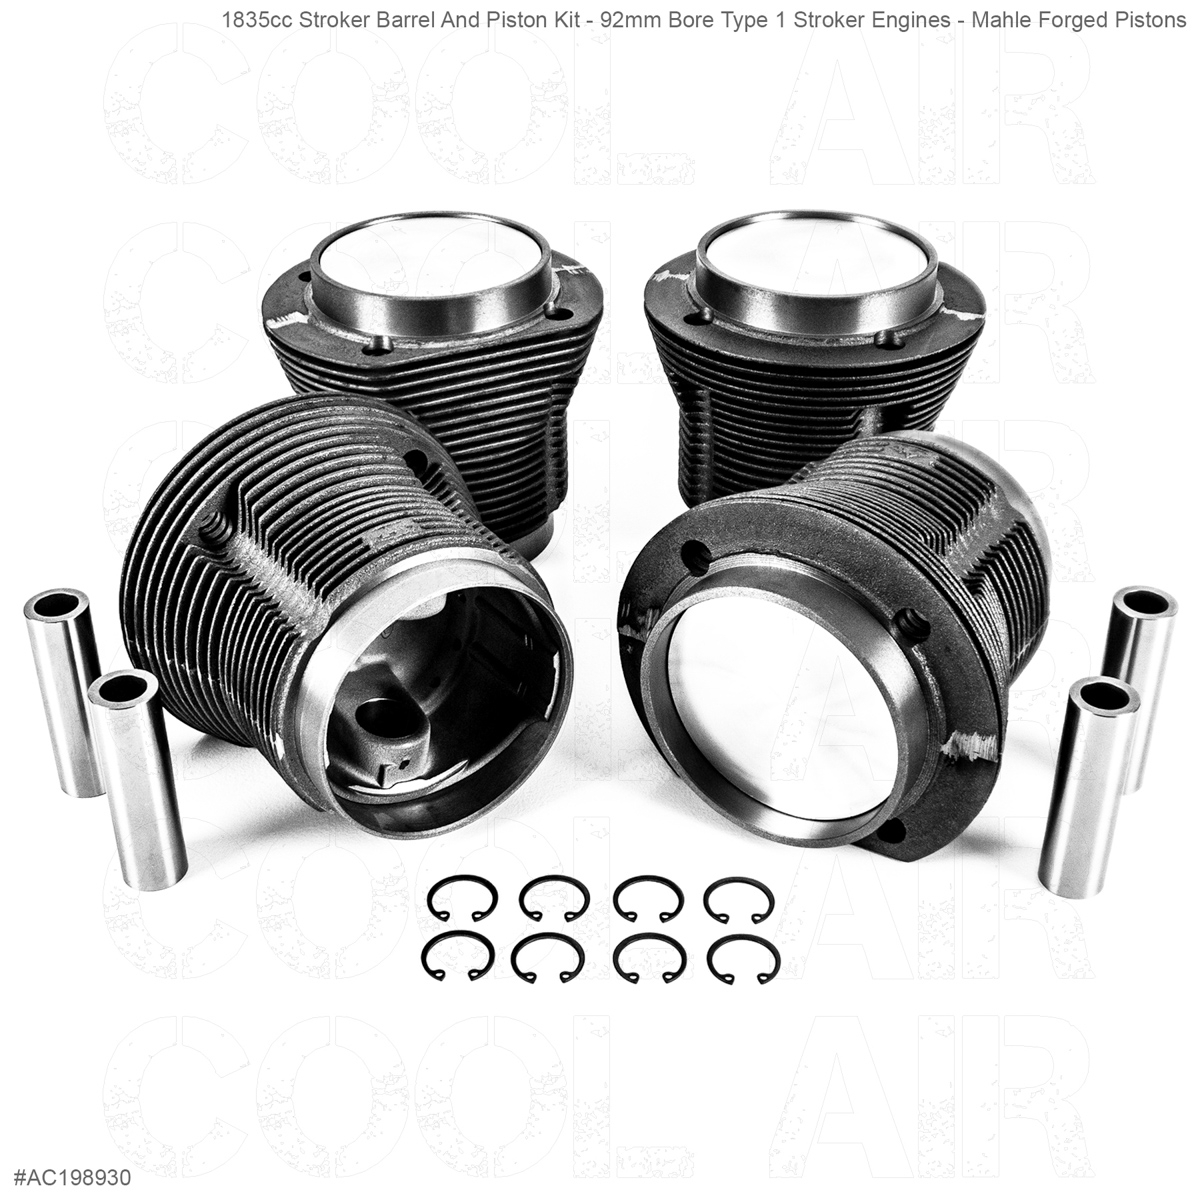 1835cc Stroker Barrel And Piston Kit - 92mm Bore Type 1 Stroker Engines - Mahle Forged Pistons